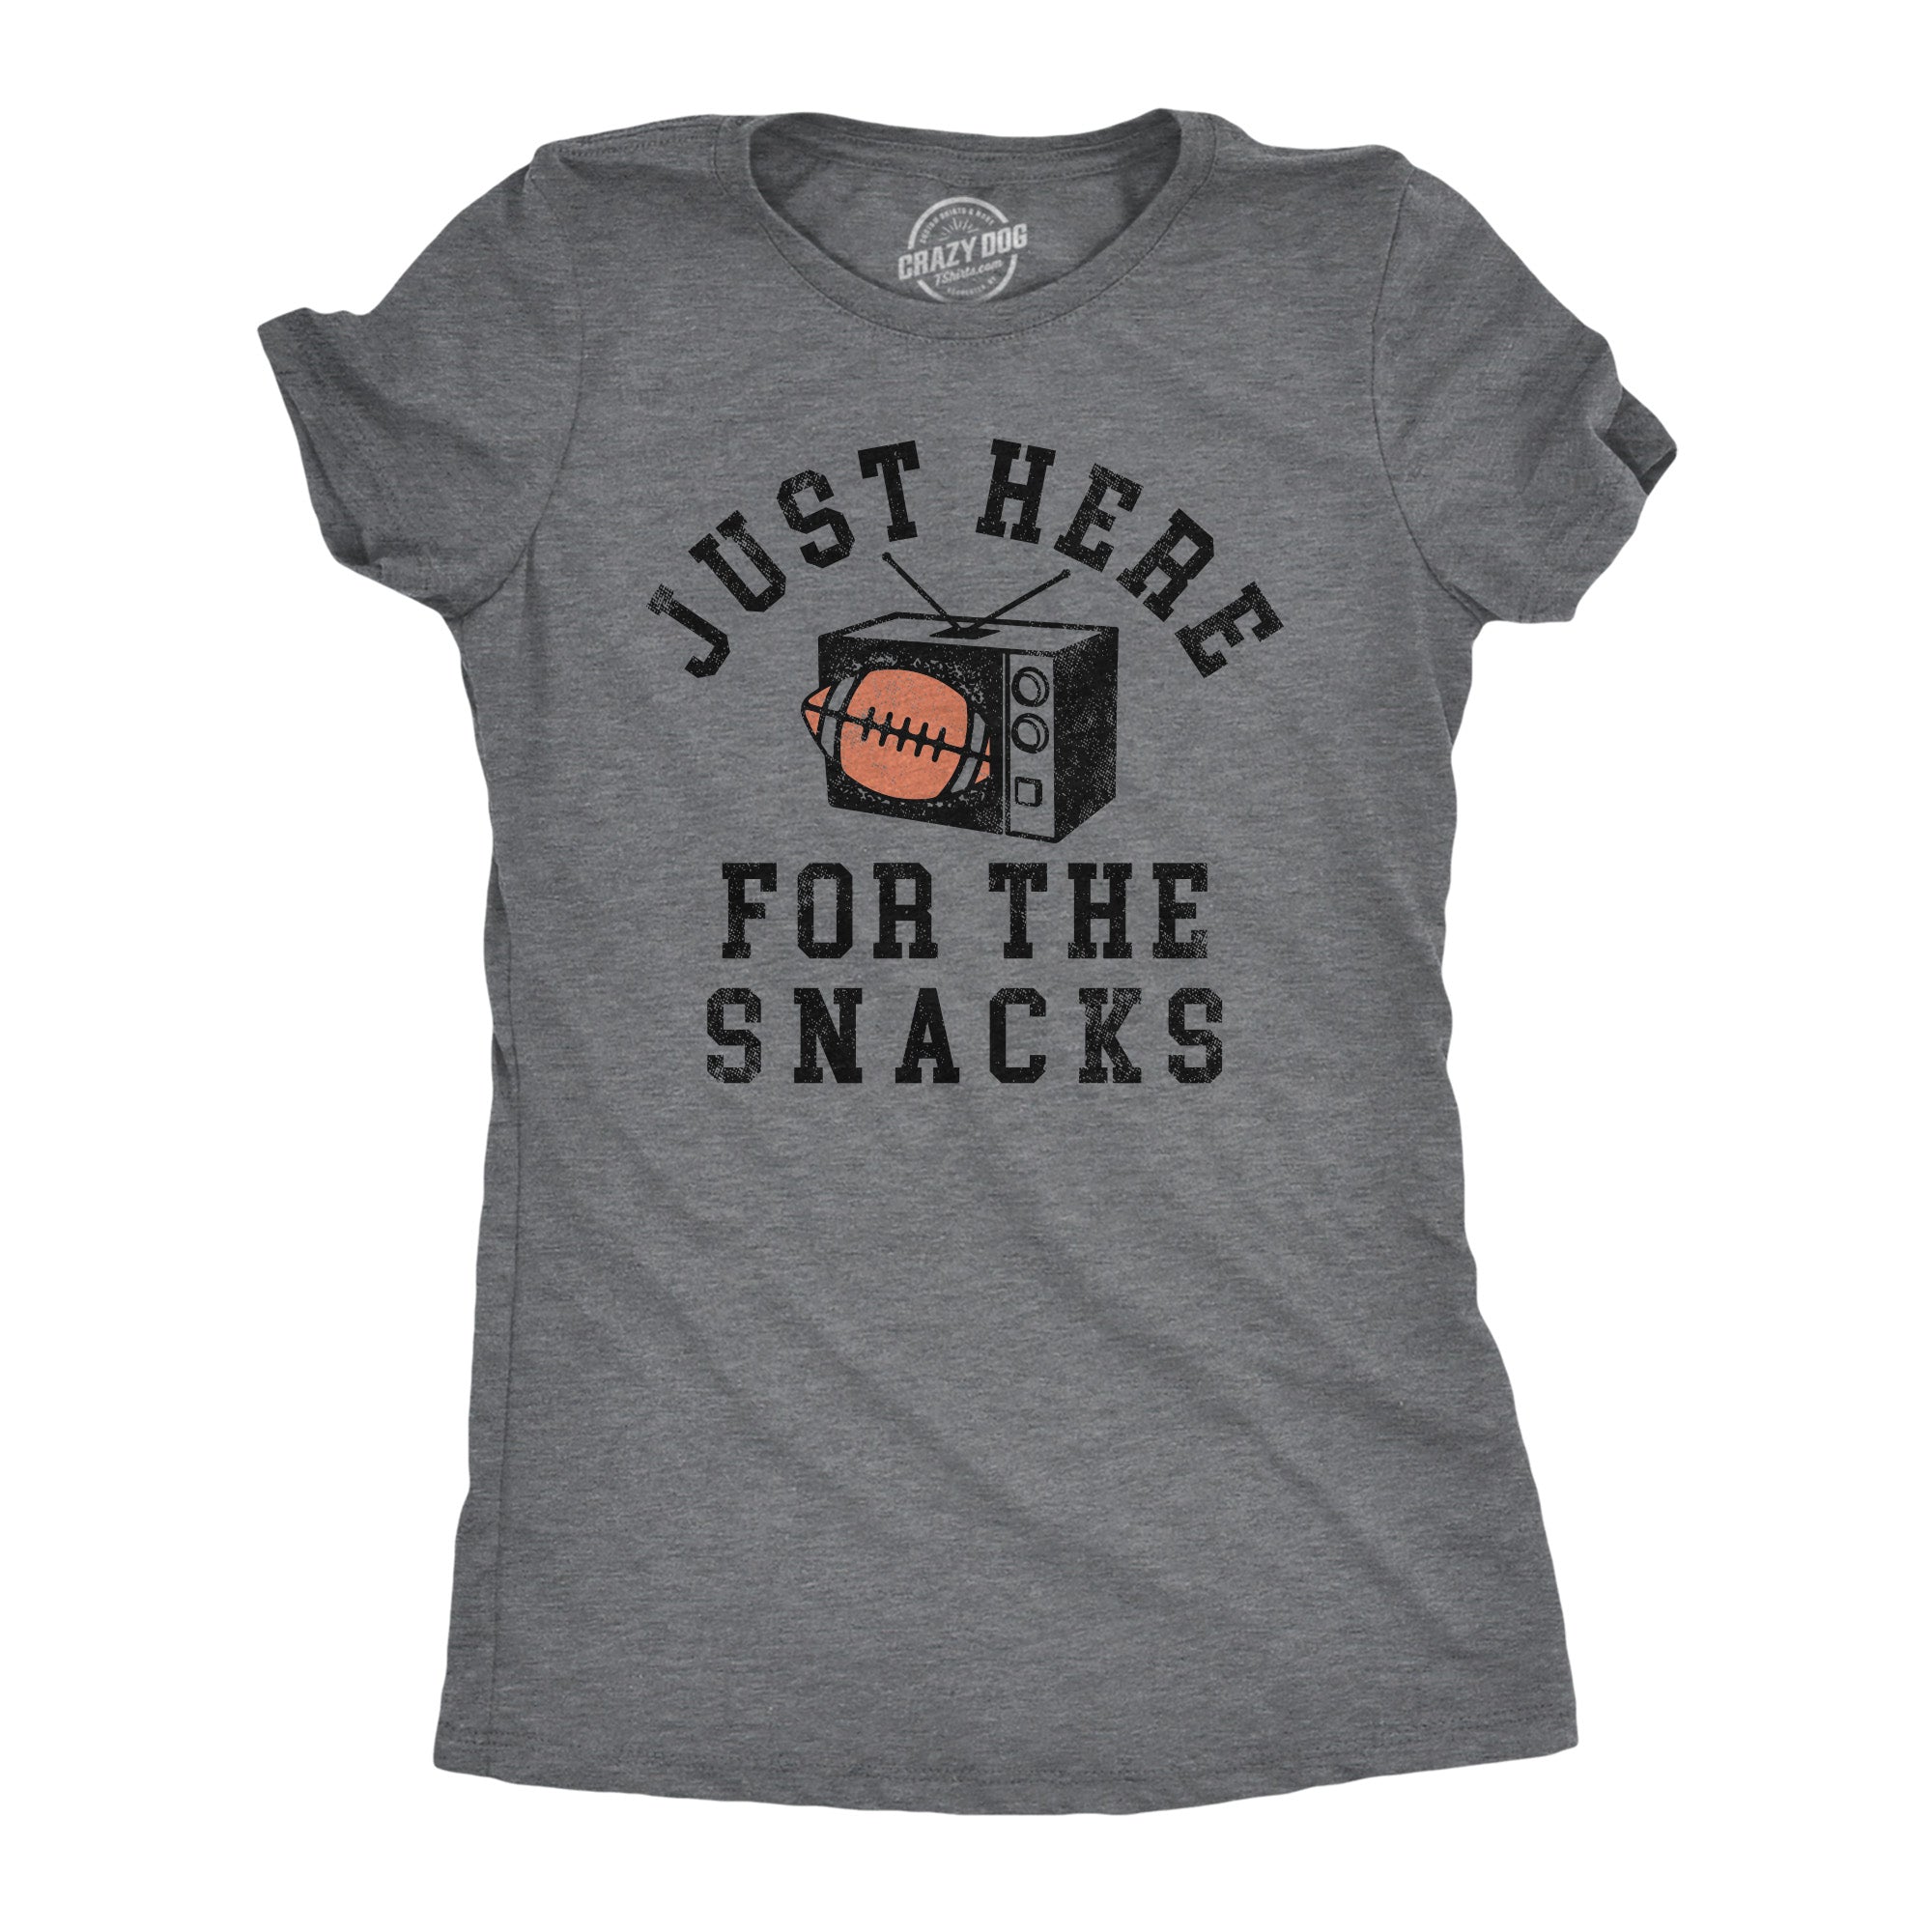 Funny Dark Heather Grey - Just Here For The Snacks Just Here For The Snacks Womens T Shirt Nerdy Football Food Tee